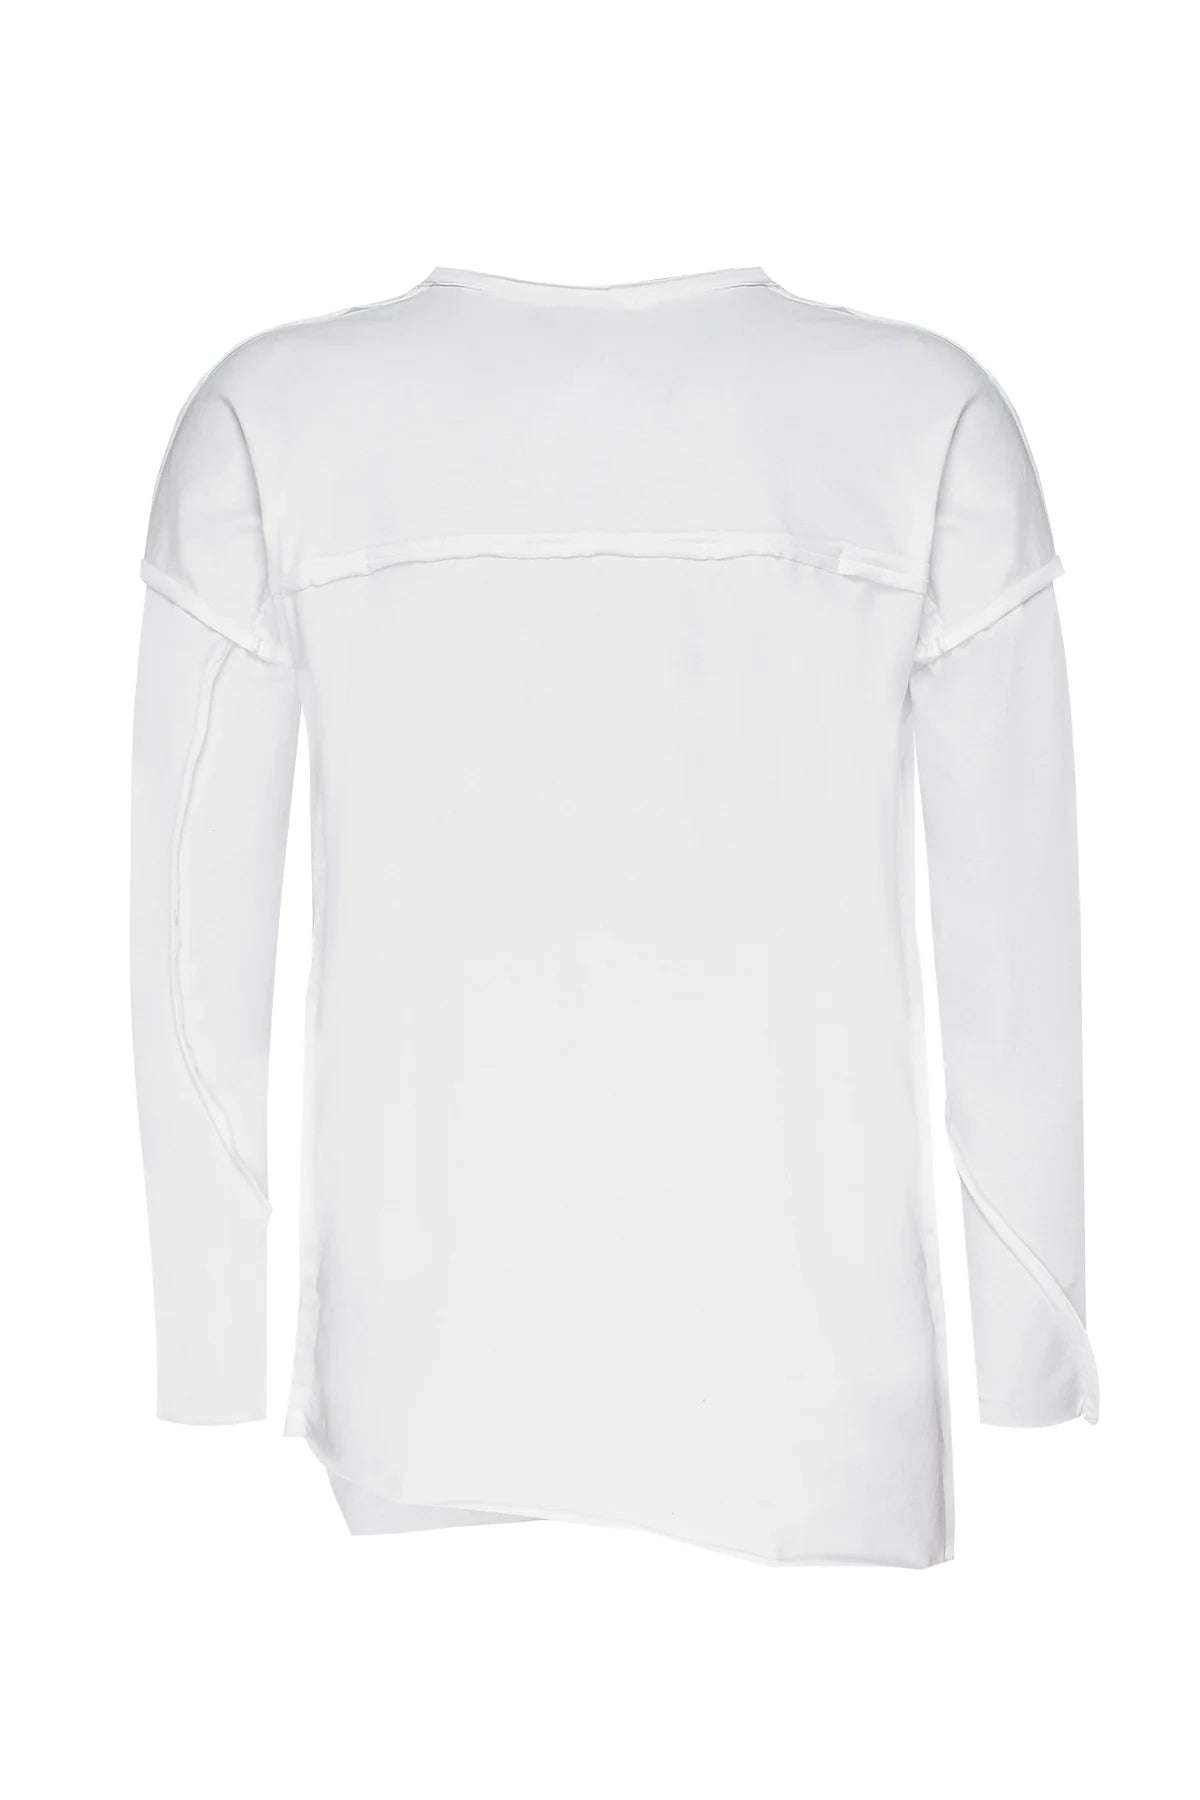 White Stitch Accent Long Sleeve T-shirt